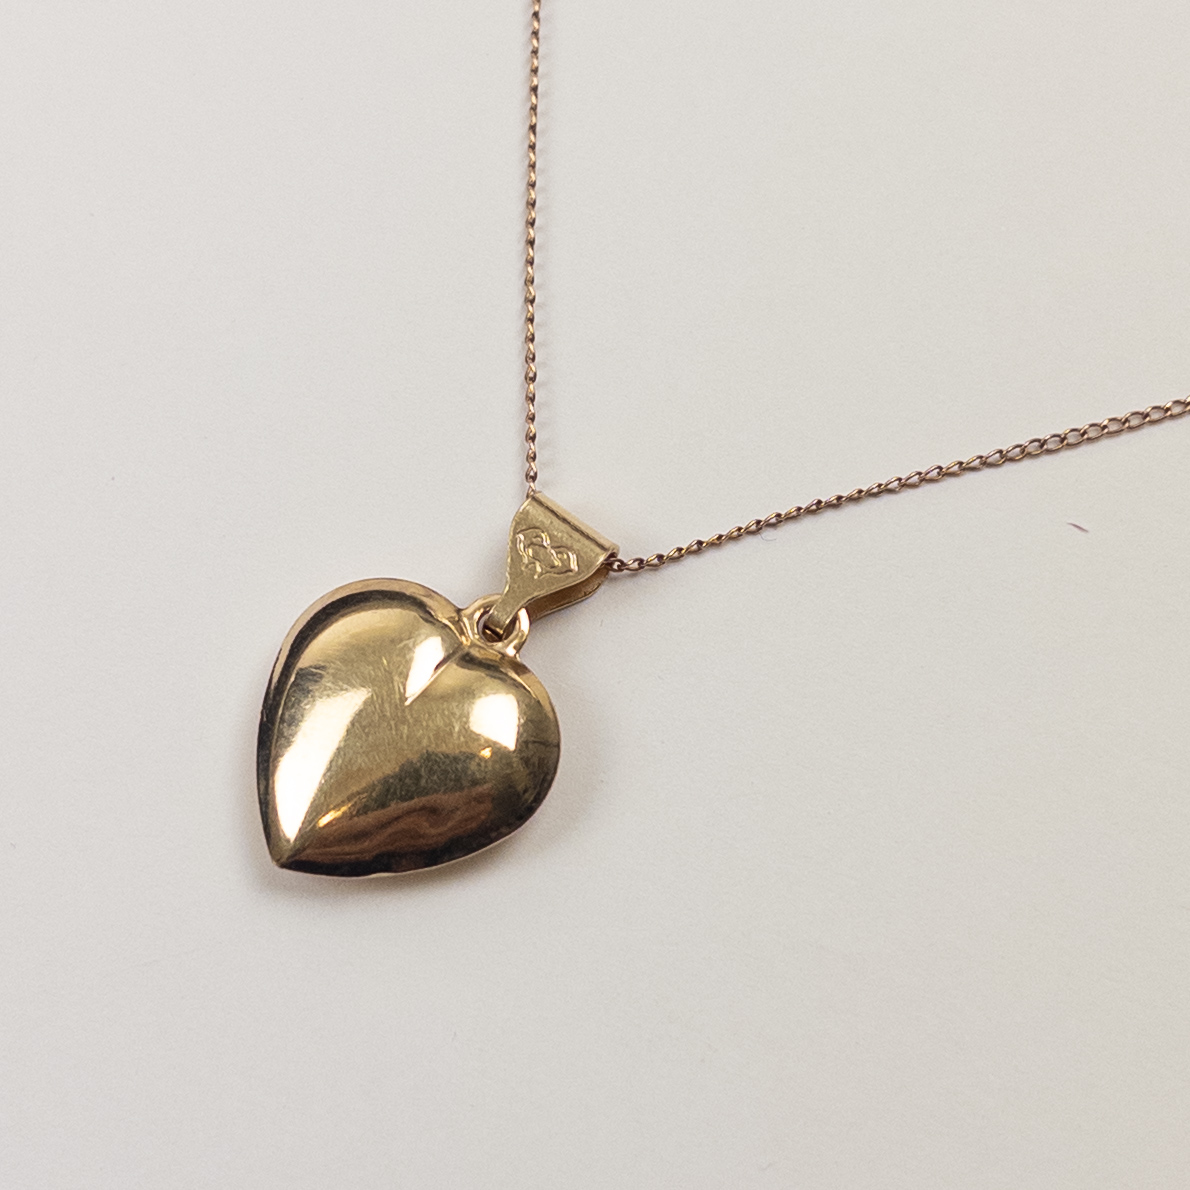 14K Gold Heart Pendant on a Curb Chain Necklace